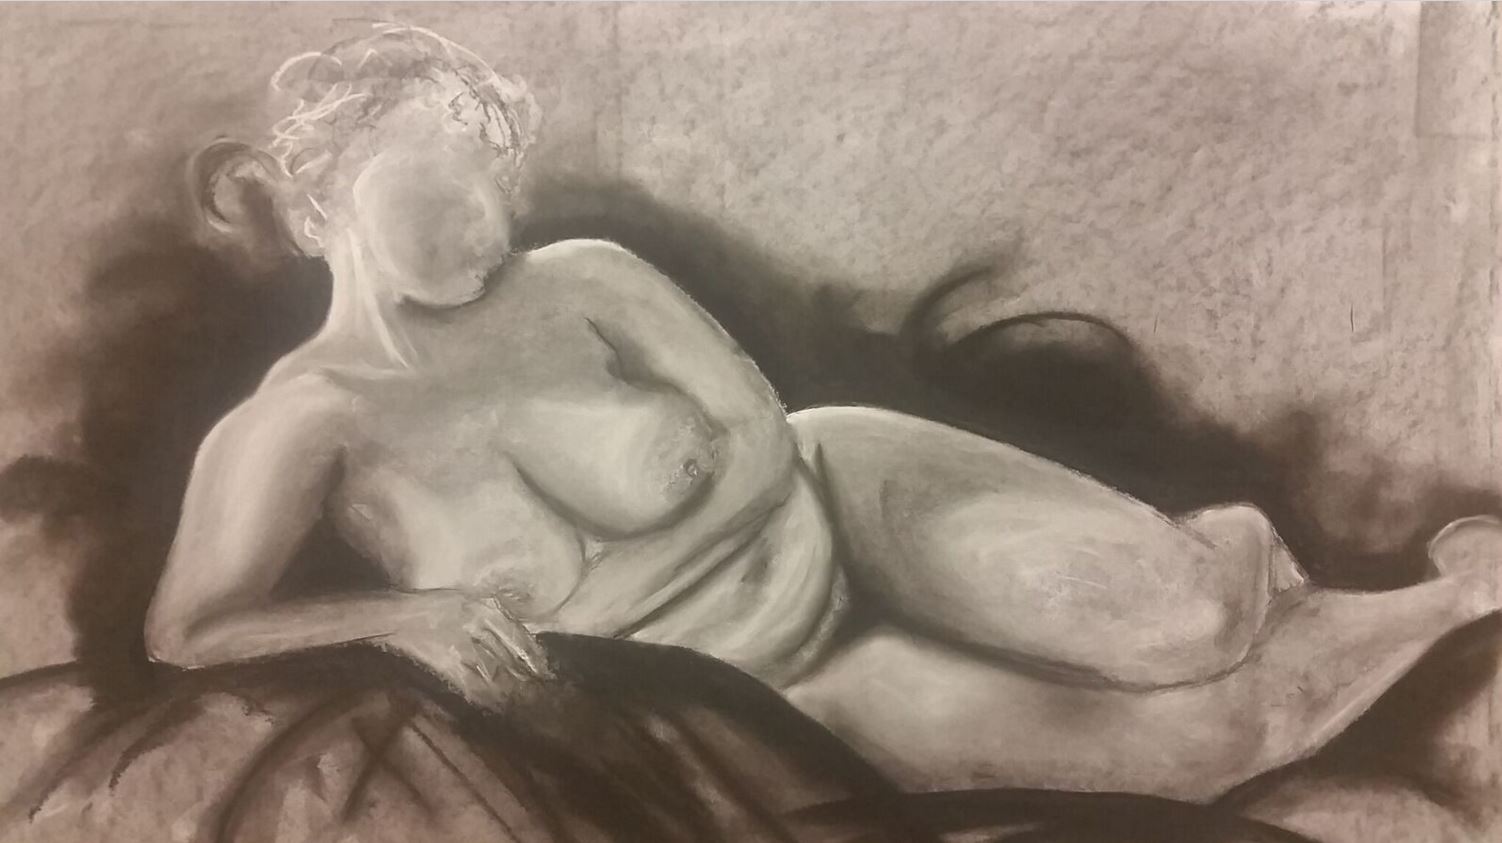 Ivana, charcoal on paper, March 2016